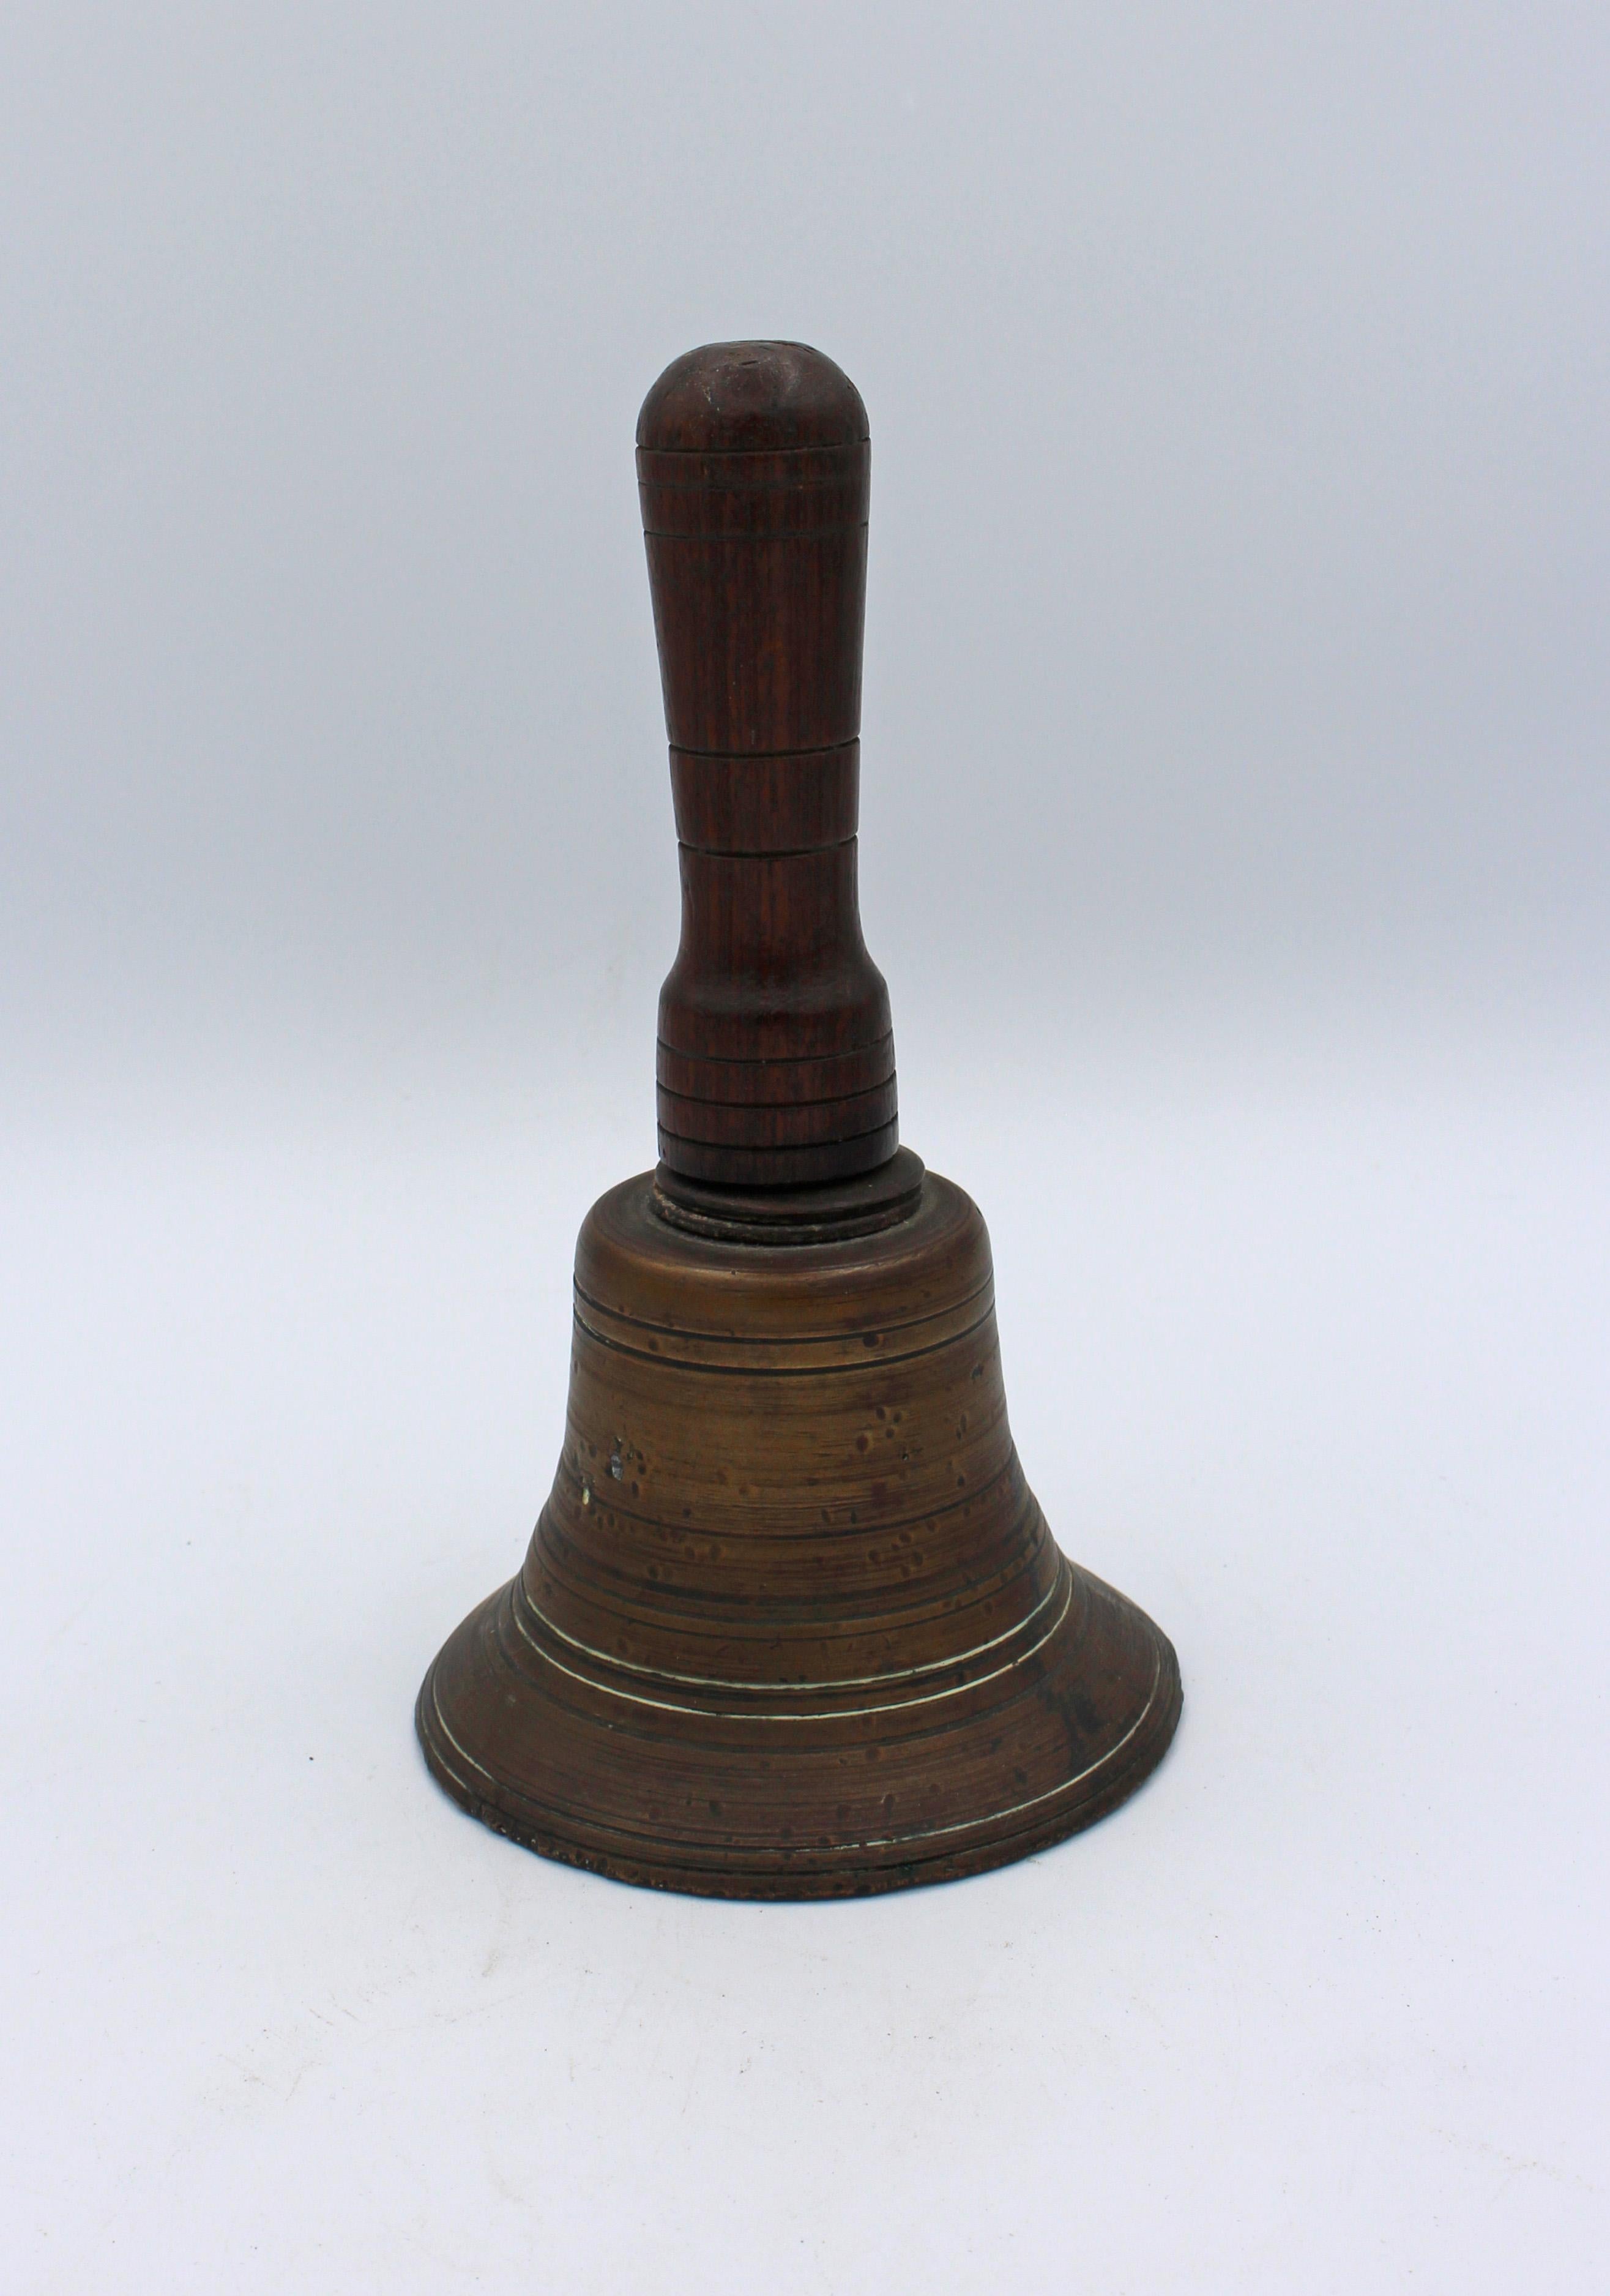 Antique hand bell of cast bronze & turned walnut; mid-late 19th century.
Measures: 4 3/8